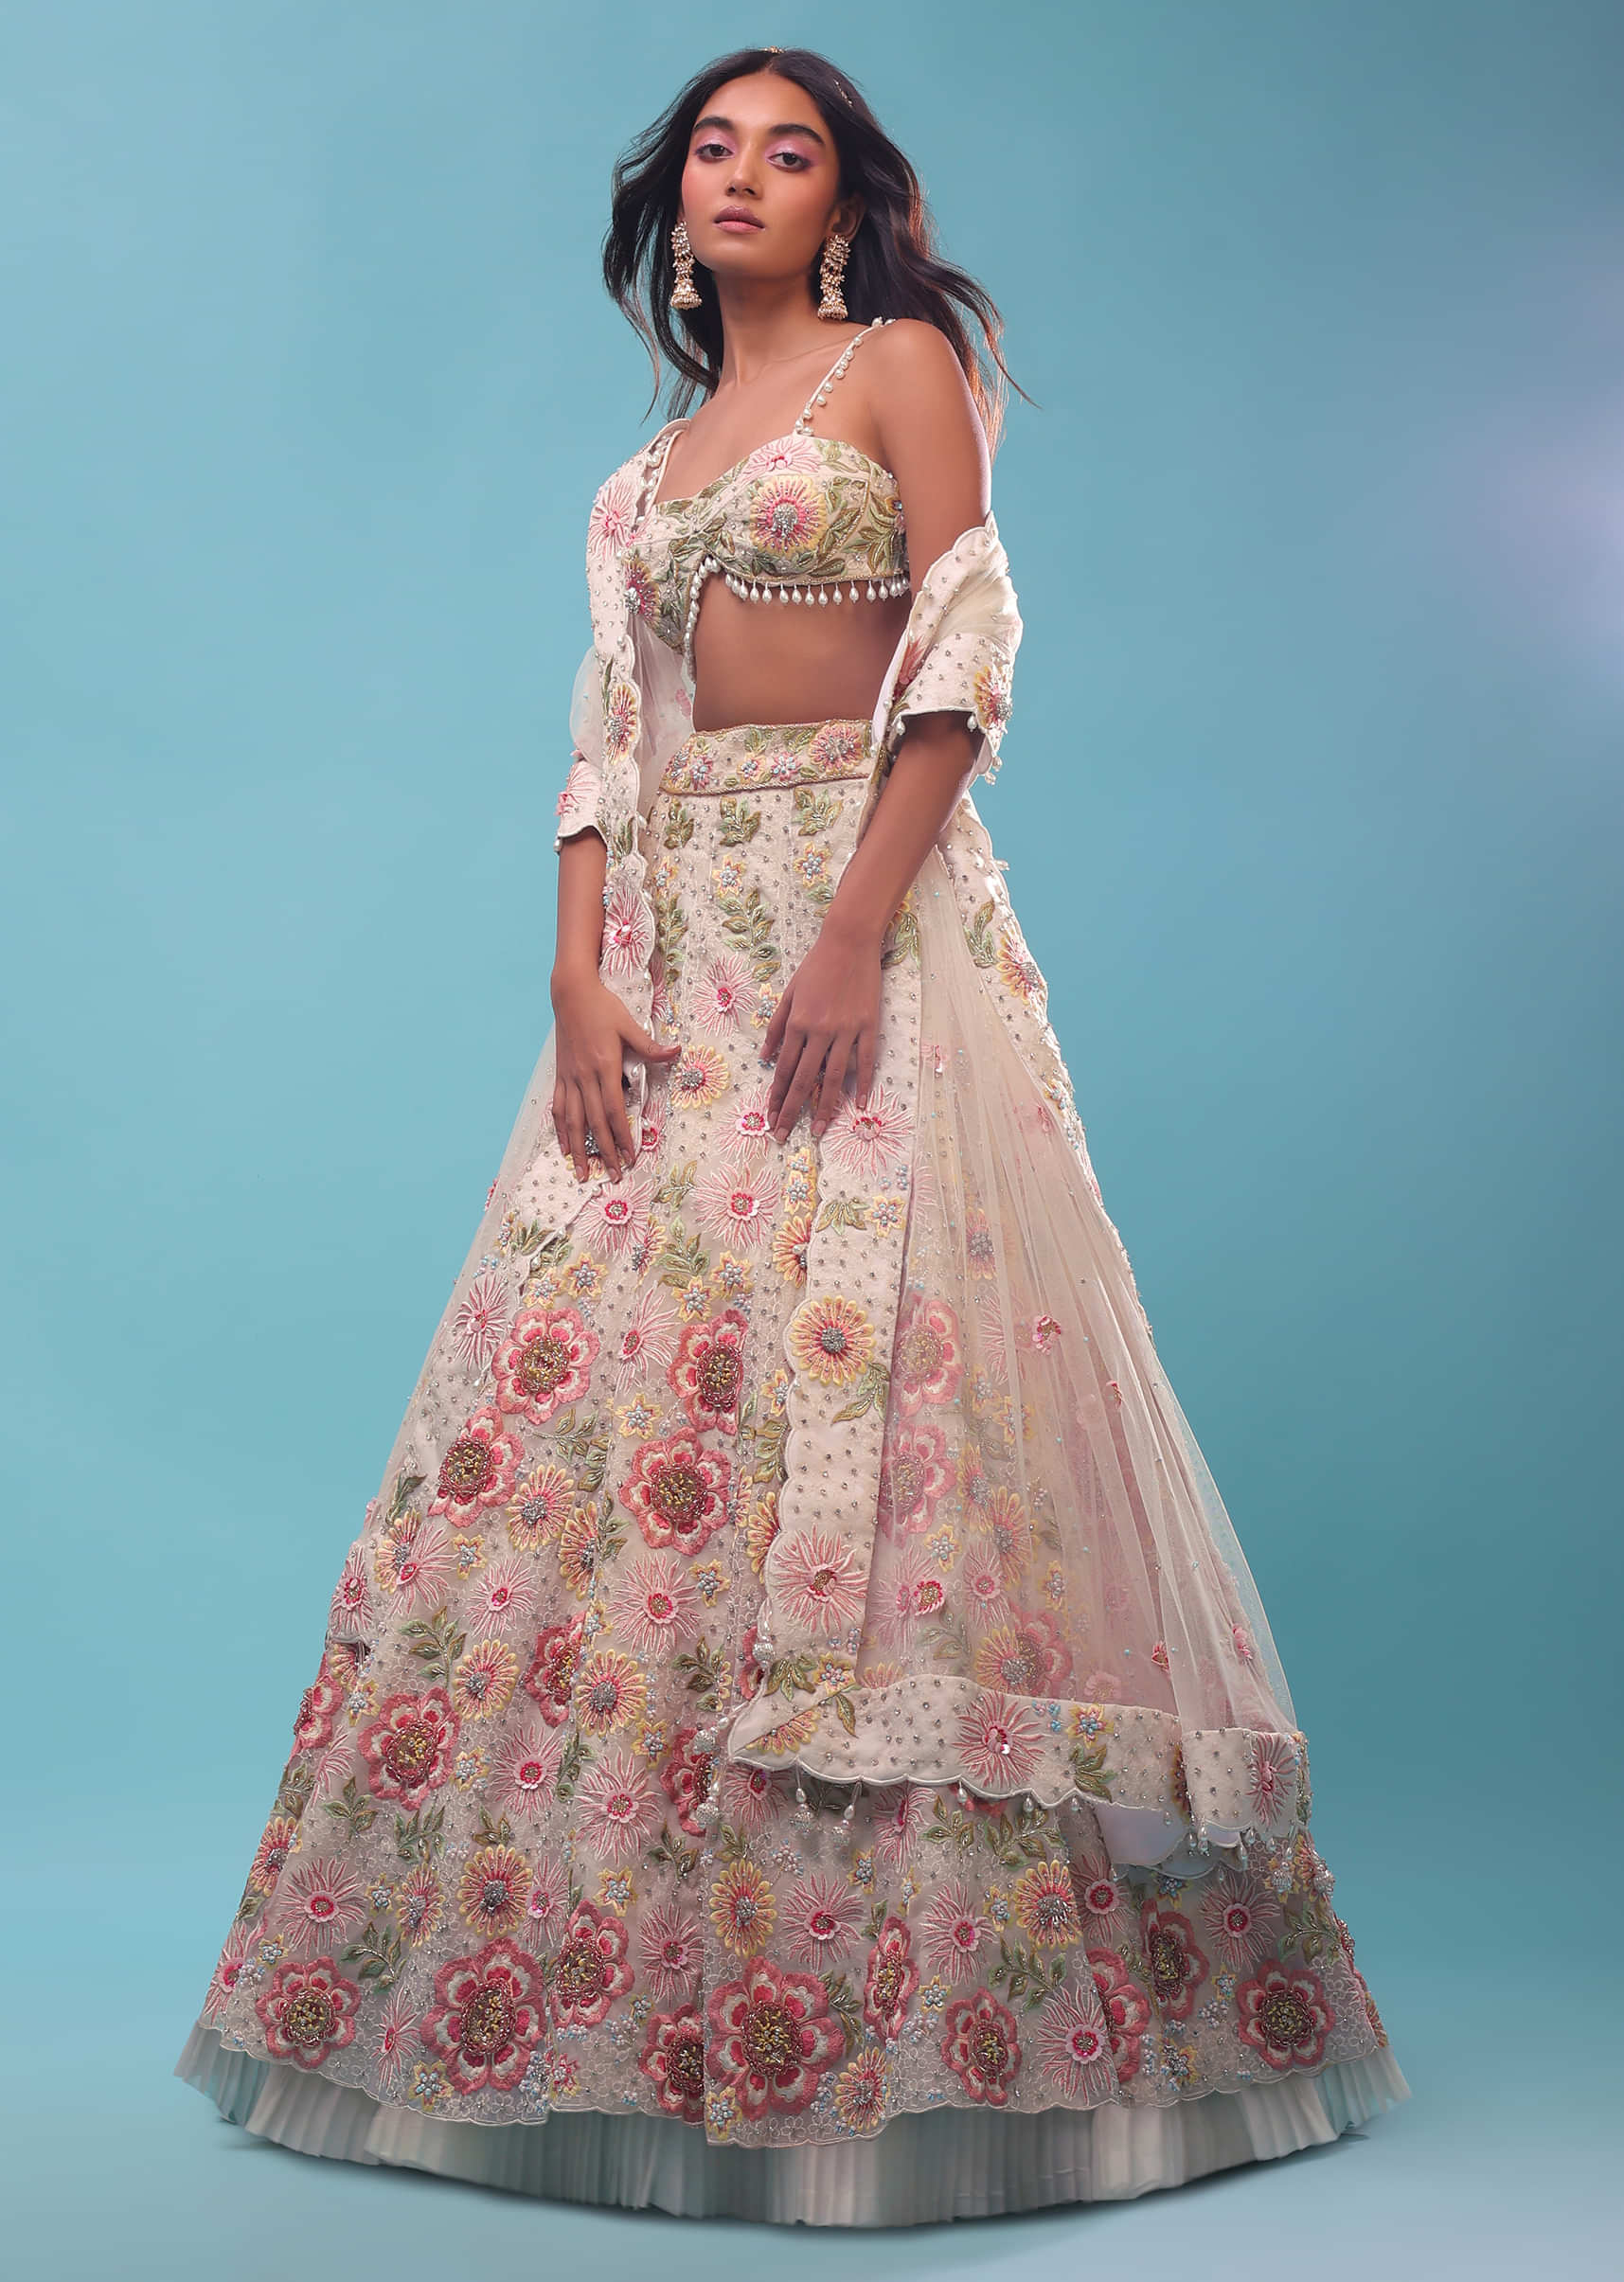 Organza-Made, Cream Lehenga With A Crop Top Embellished With 3D Flower Motifs In Moti Embroidery